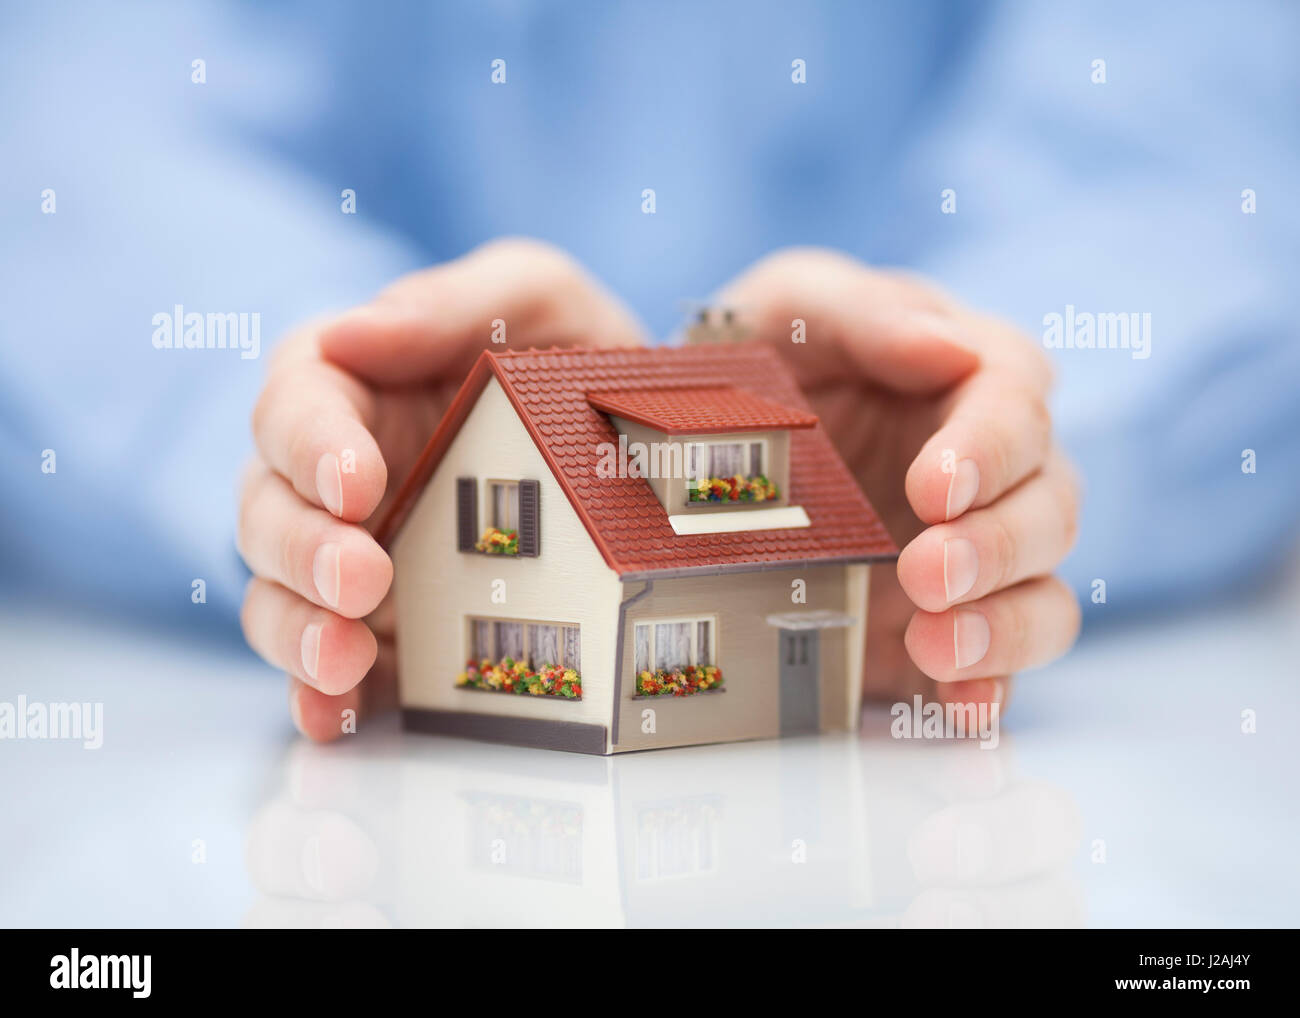 Property insurance concept. Small toy house covered by hands Stock Photo